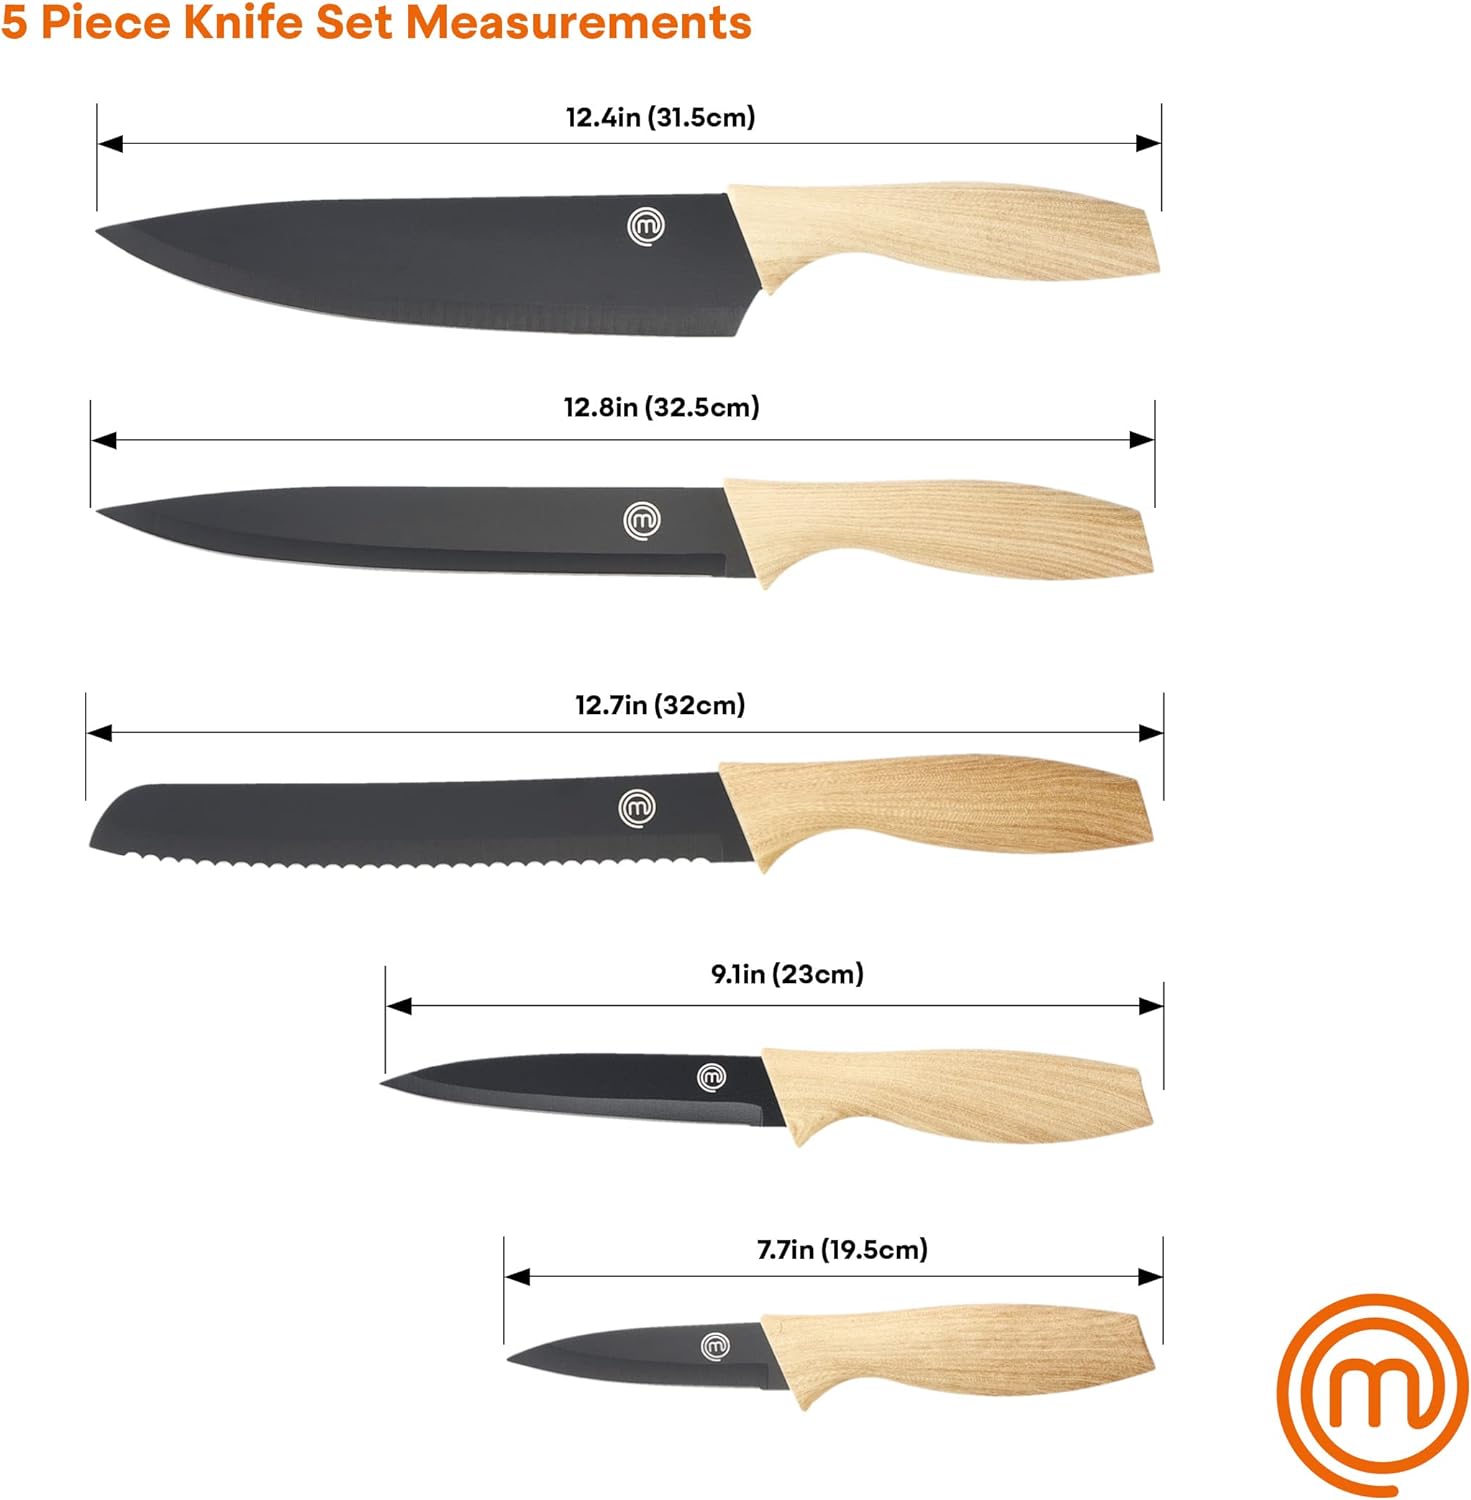 MasterChef Knife Set of 5 Kitchen Knives for Cooking with Non Stick Blades & Soft Touch Handles